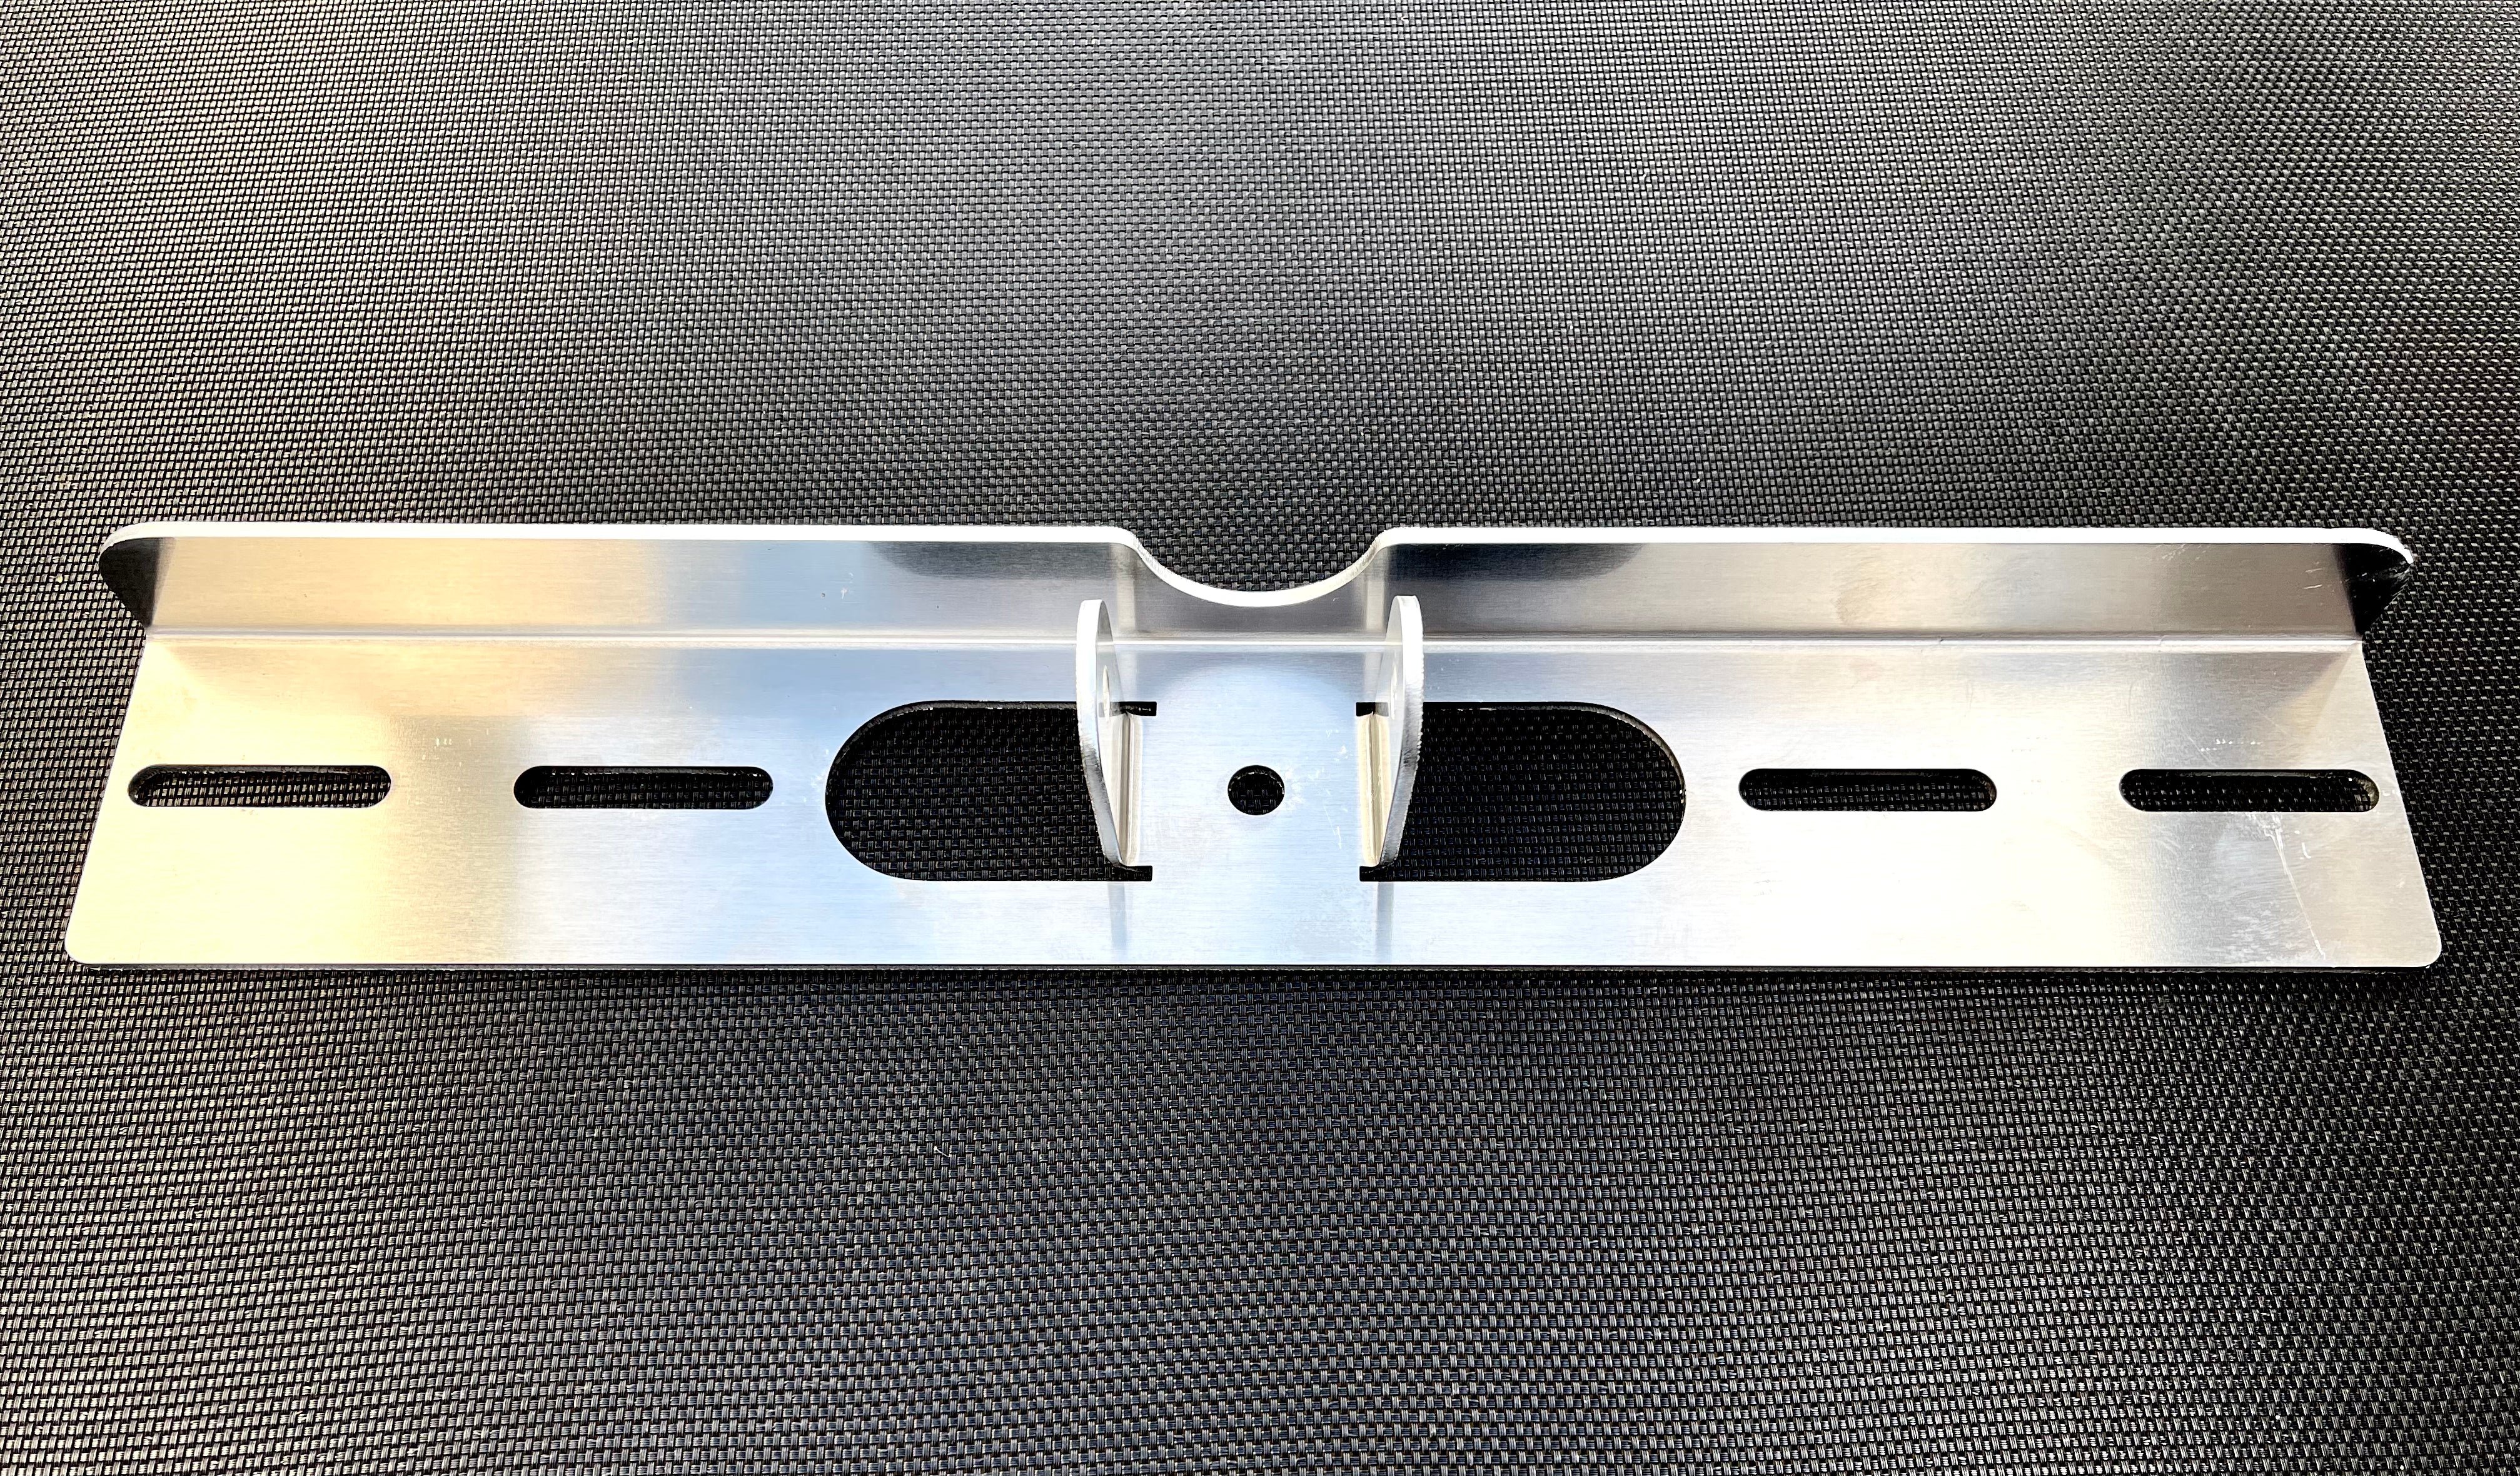 6 X Heavy Duty Base Plate (400mm) - With M8 Nut & Bolt